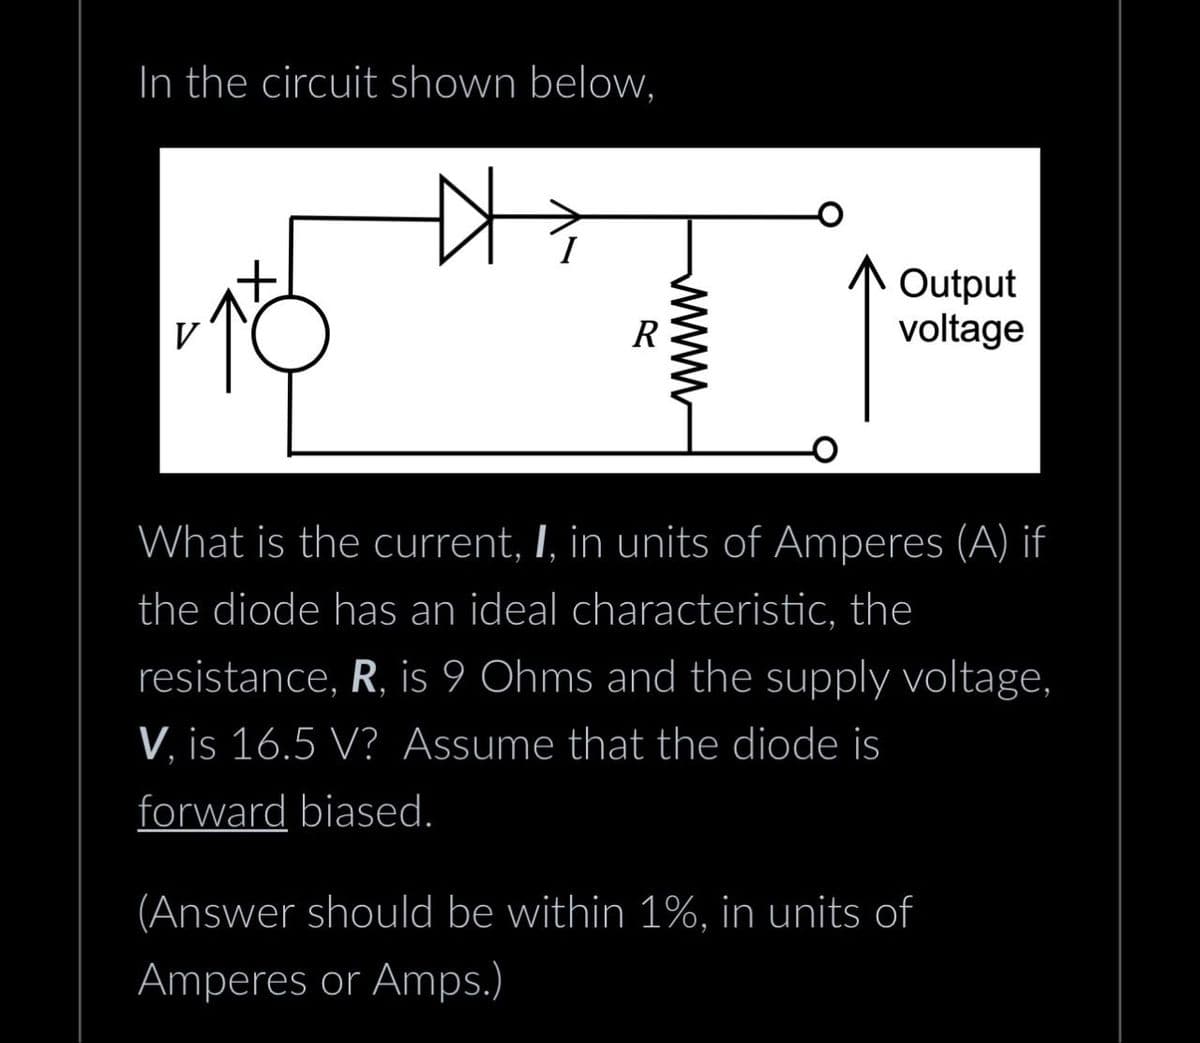 In the circuit shown below,
V
R
www
Output
voltage
What is the current, I, in units of Amperes (A) if
the diode has an ideal characteristic, the
resistance, R, is 9 Ohms and the supply voltage,
V, is 16.5 V? Assume that the diode is
forward biased.
(Answer should be within 1%, in units of
Amperes or Amps.)